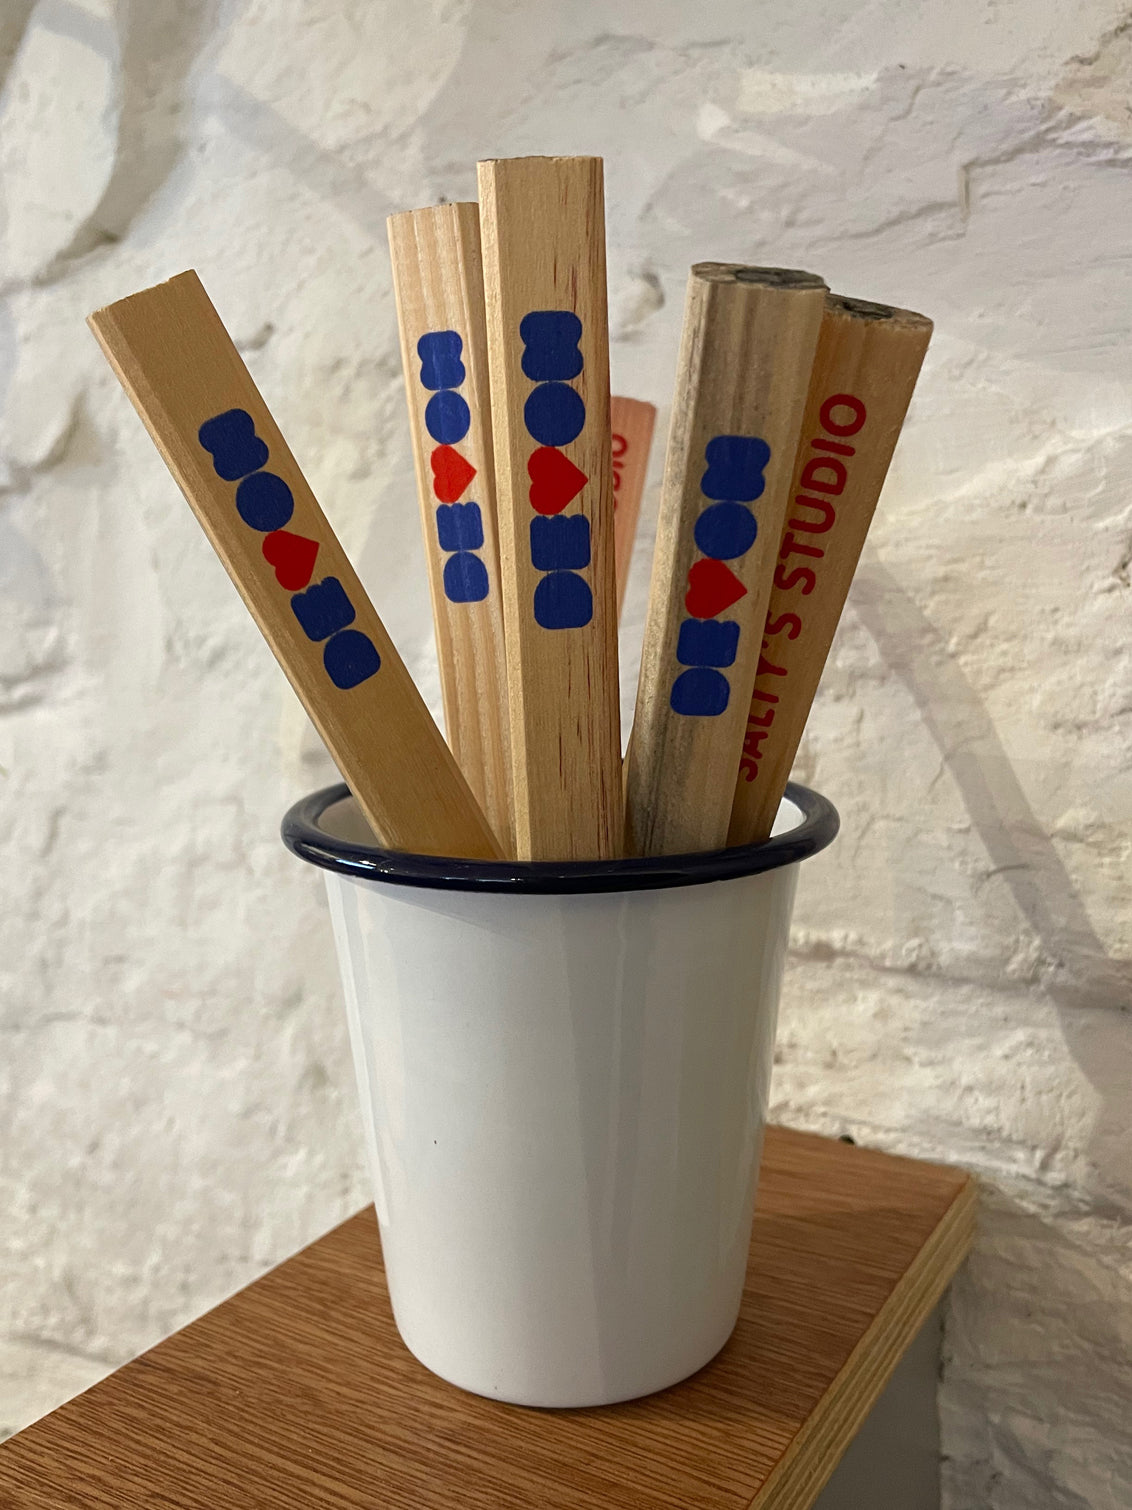 several wooden flat carpenters pencils are stood in a white enamel pot on a plywood shelf. One end of the pencils has been printed with Devon in blue and red, with the V as a heart. Stood against a whitewashed rough stone Devon wall